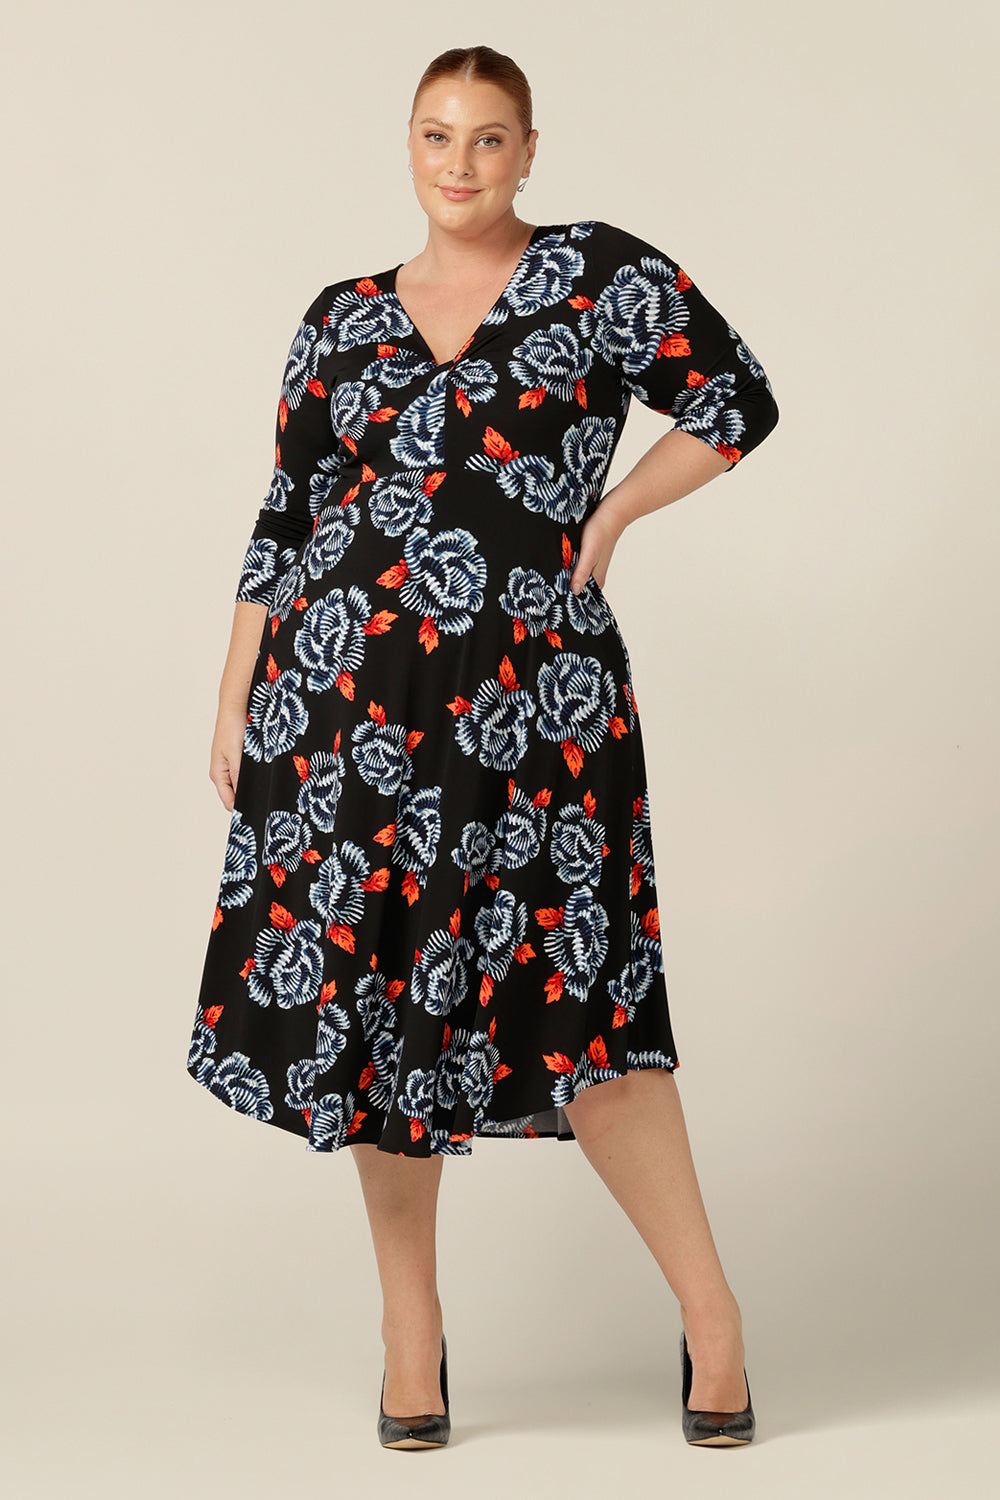 A size 18 fuller figure woman wears a blue and orange floral print jersey dress by Australian and New Zealand women's clothing brand, L&F. this empire line dress features a V-neckline with twist detail, 3/4 sleeves and a full below-the-knee-length skirt. Australian-made, shop L&F work dresses in sizes 8 to size 24.